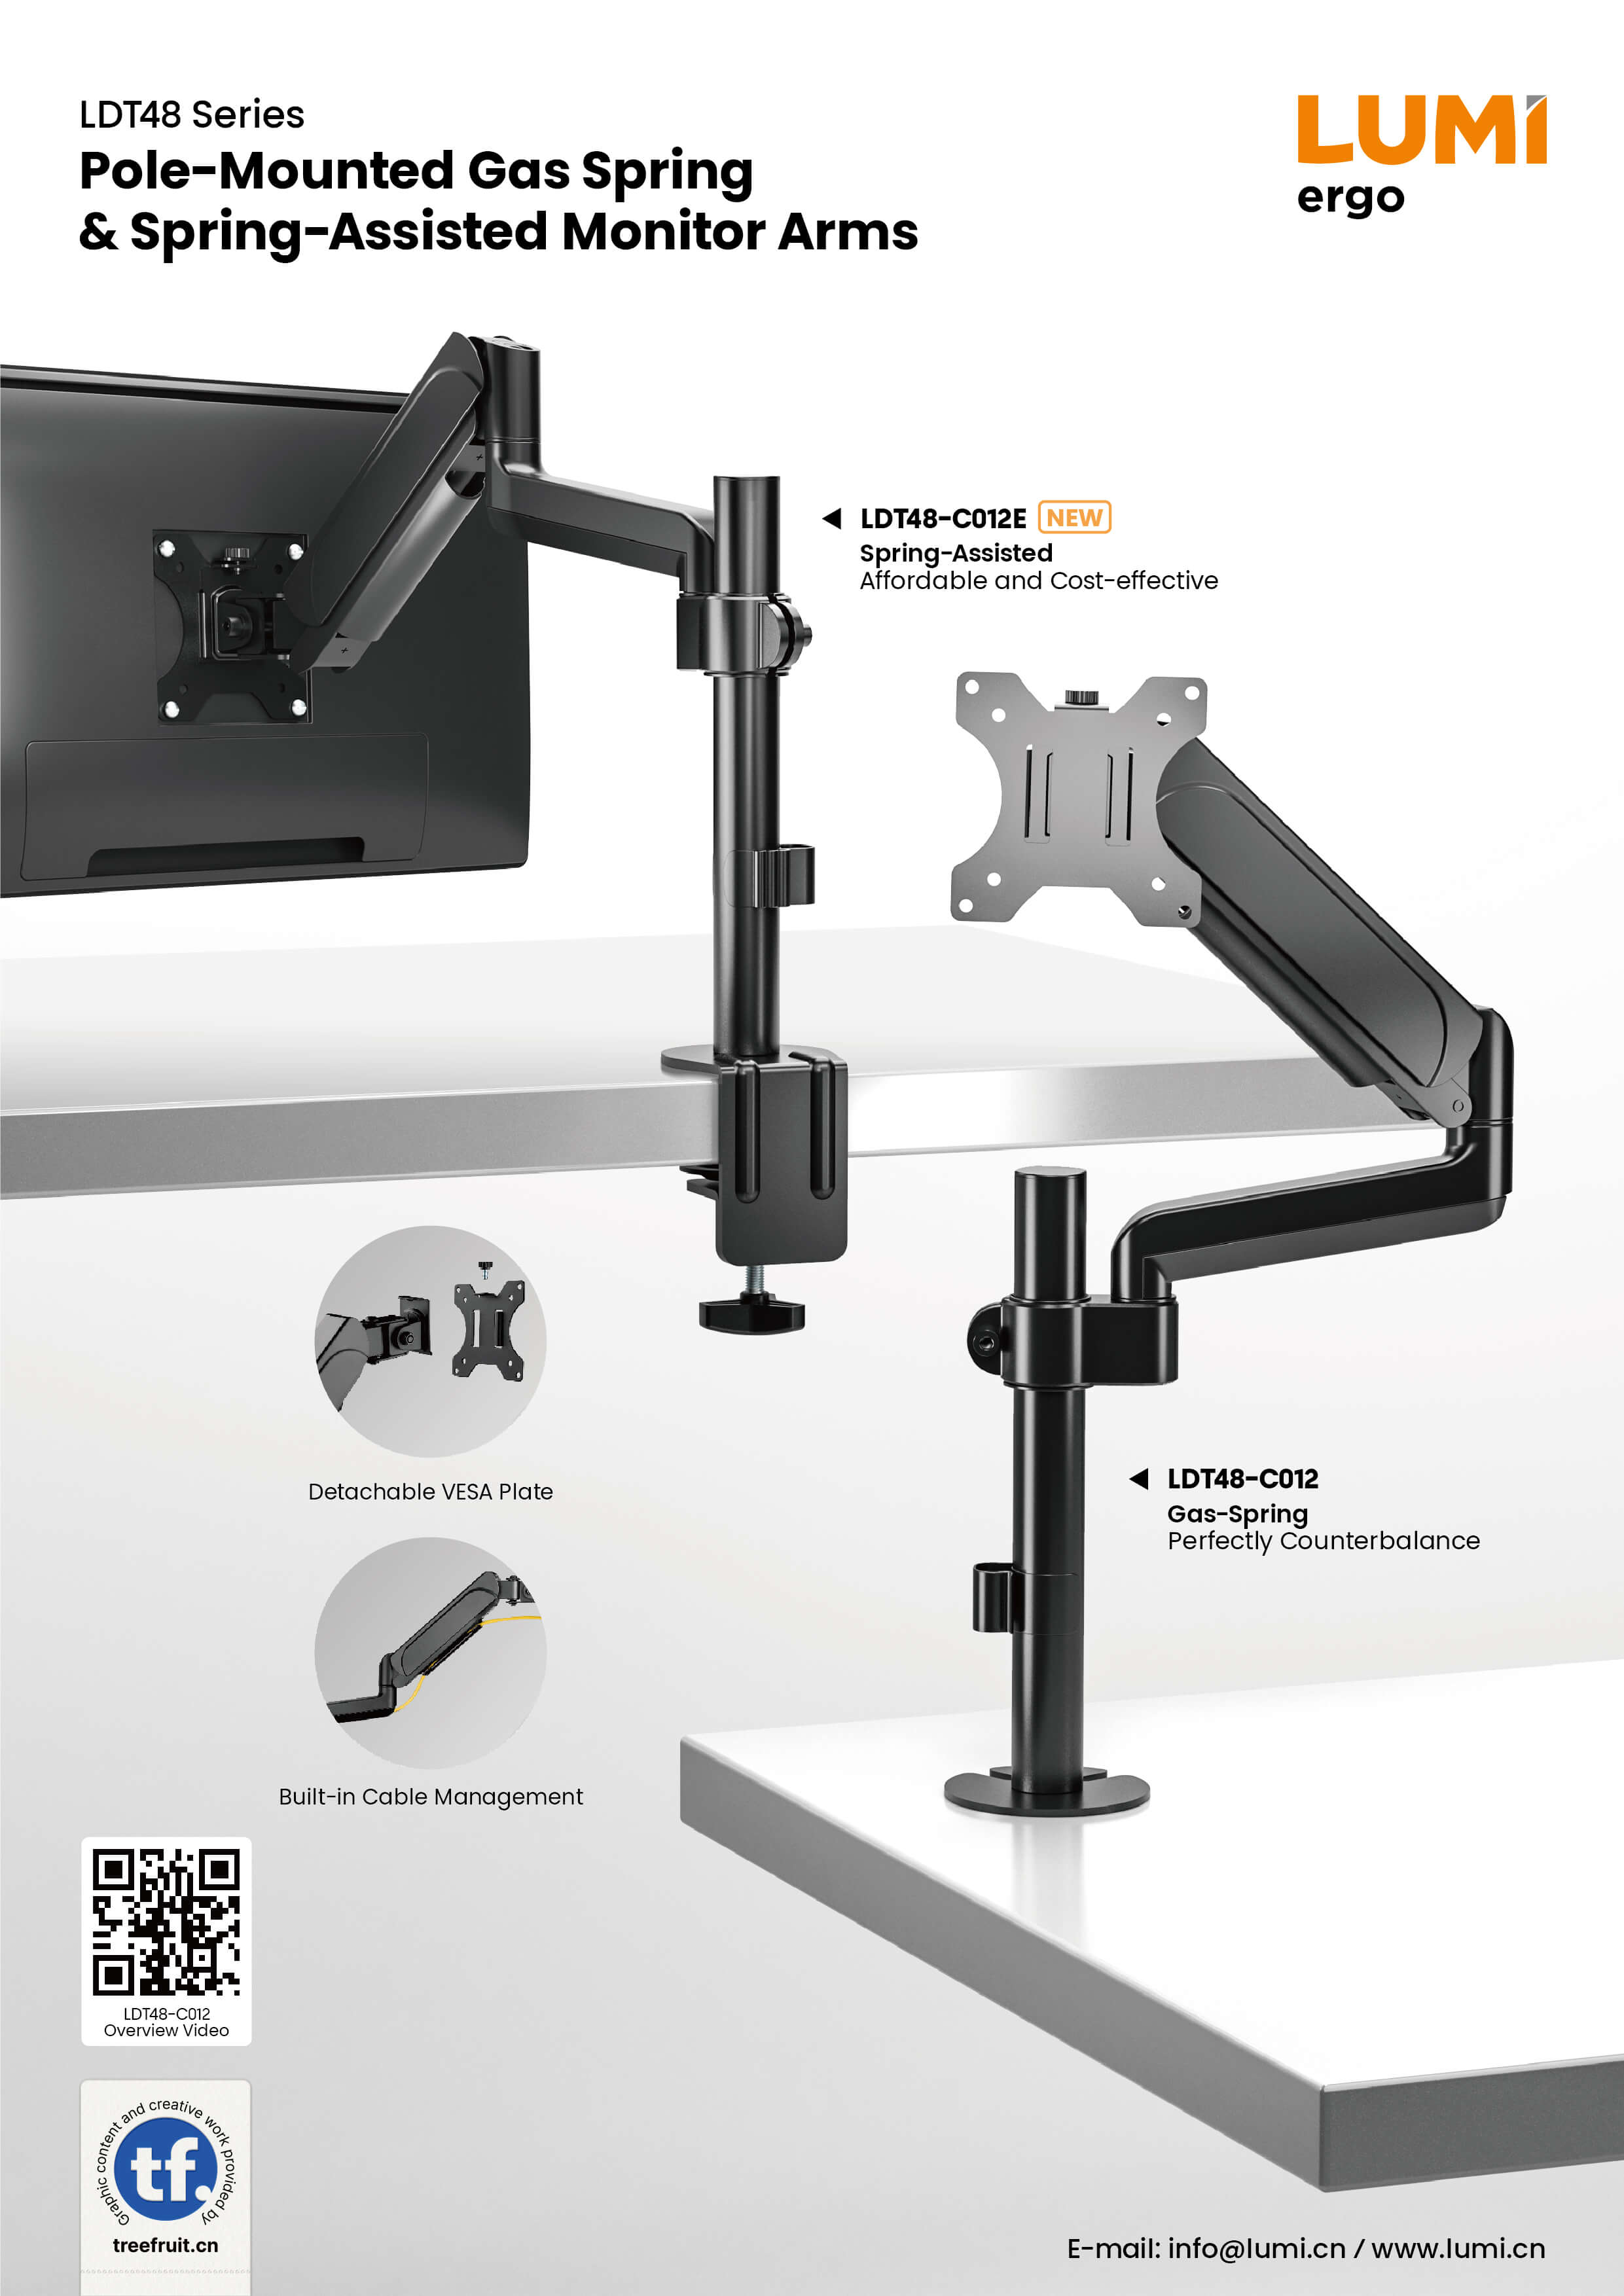 LDT48 Series Pole-Mounted Gas Spring & Spring-Assisted Monitor Arms